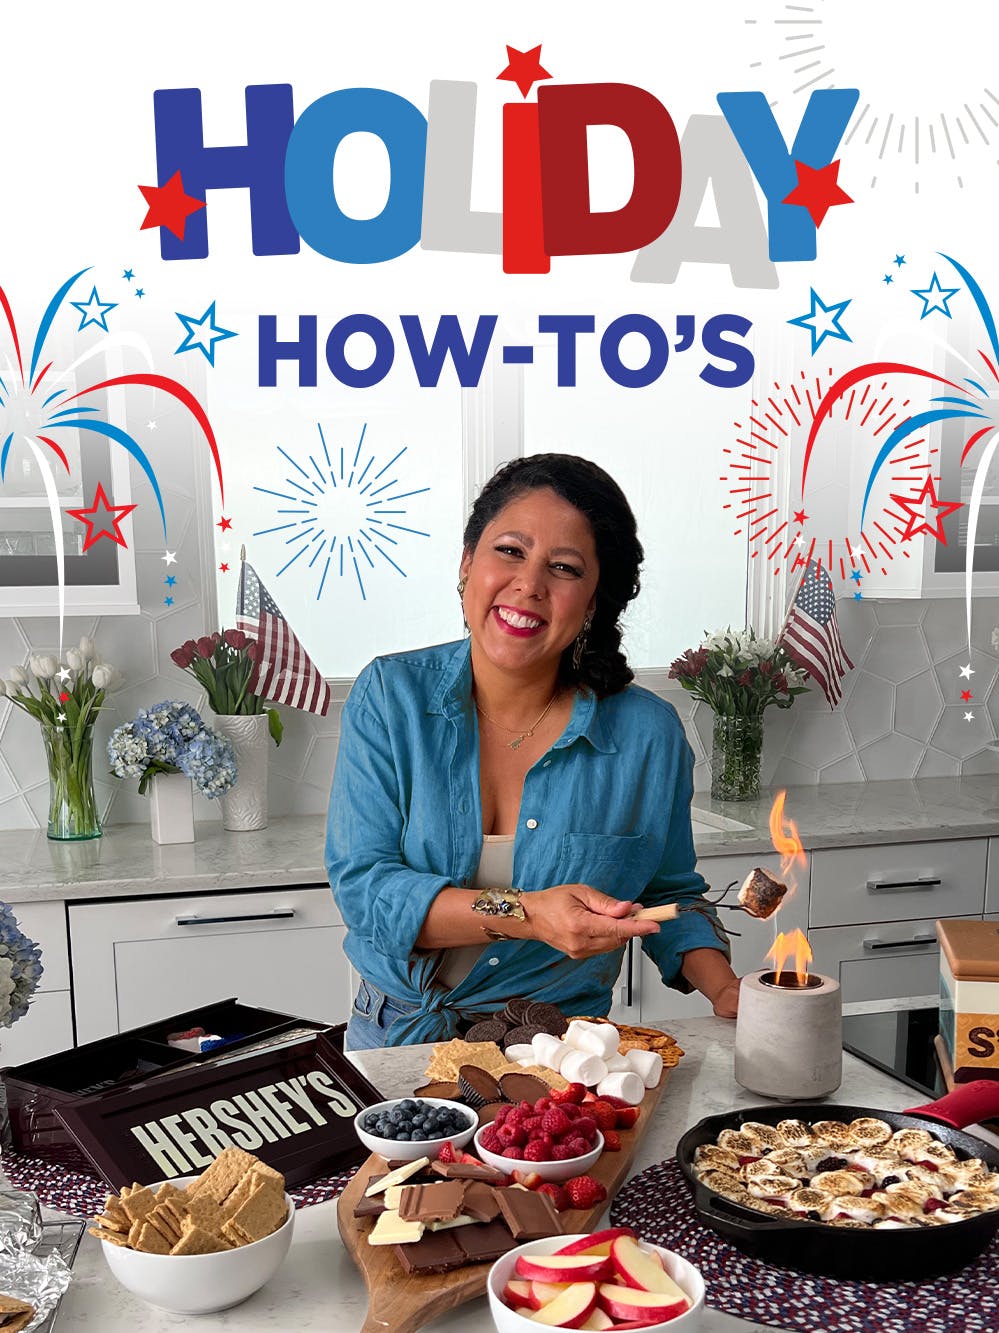 Holiday How-To's